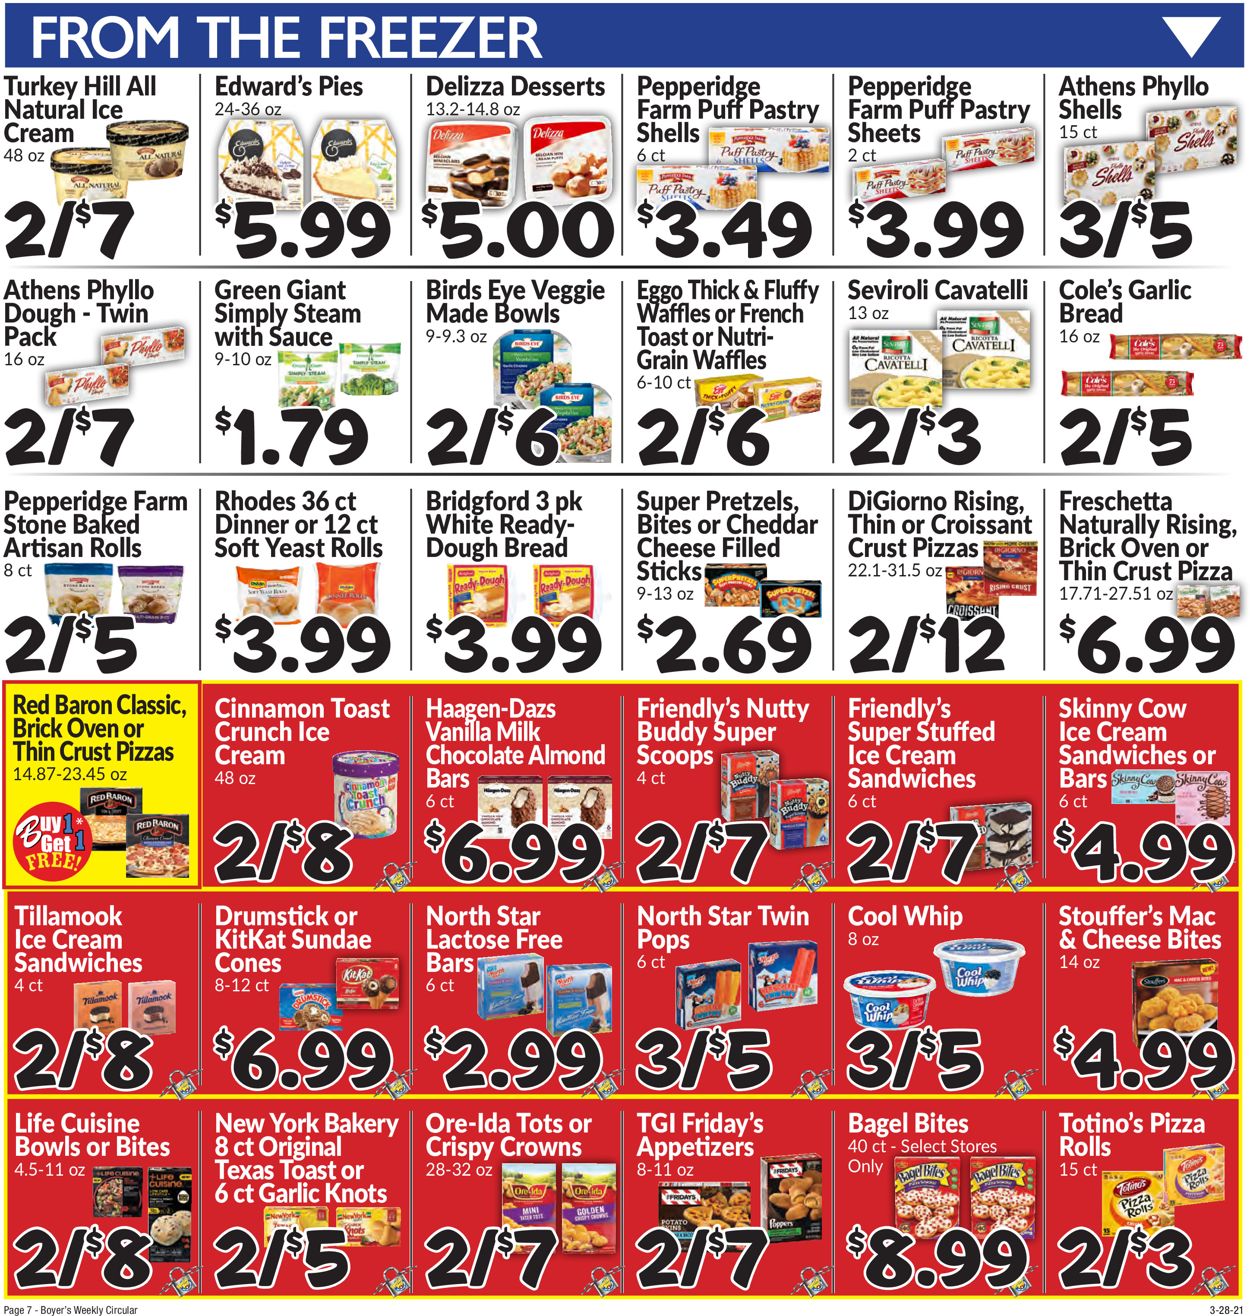 Boyer's Food Markets - Easter 2021 ad Weekly Ad Circular - valid 03/28-04/03/2021 (Page 10)